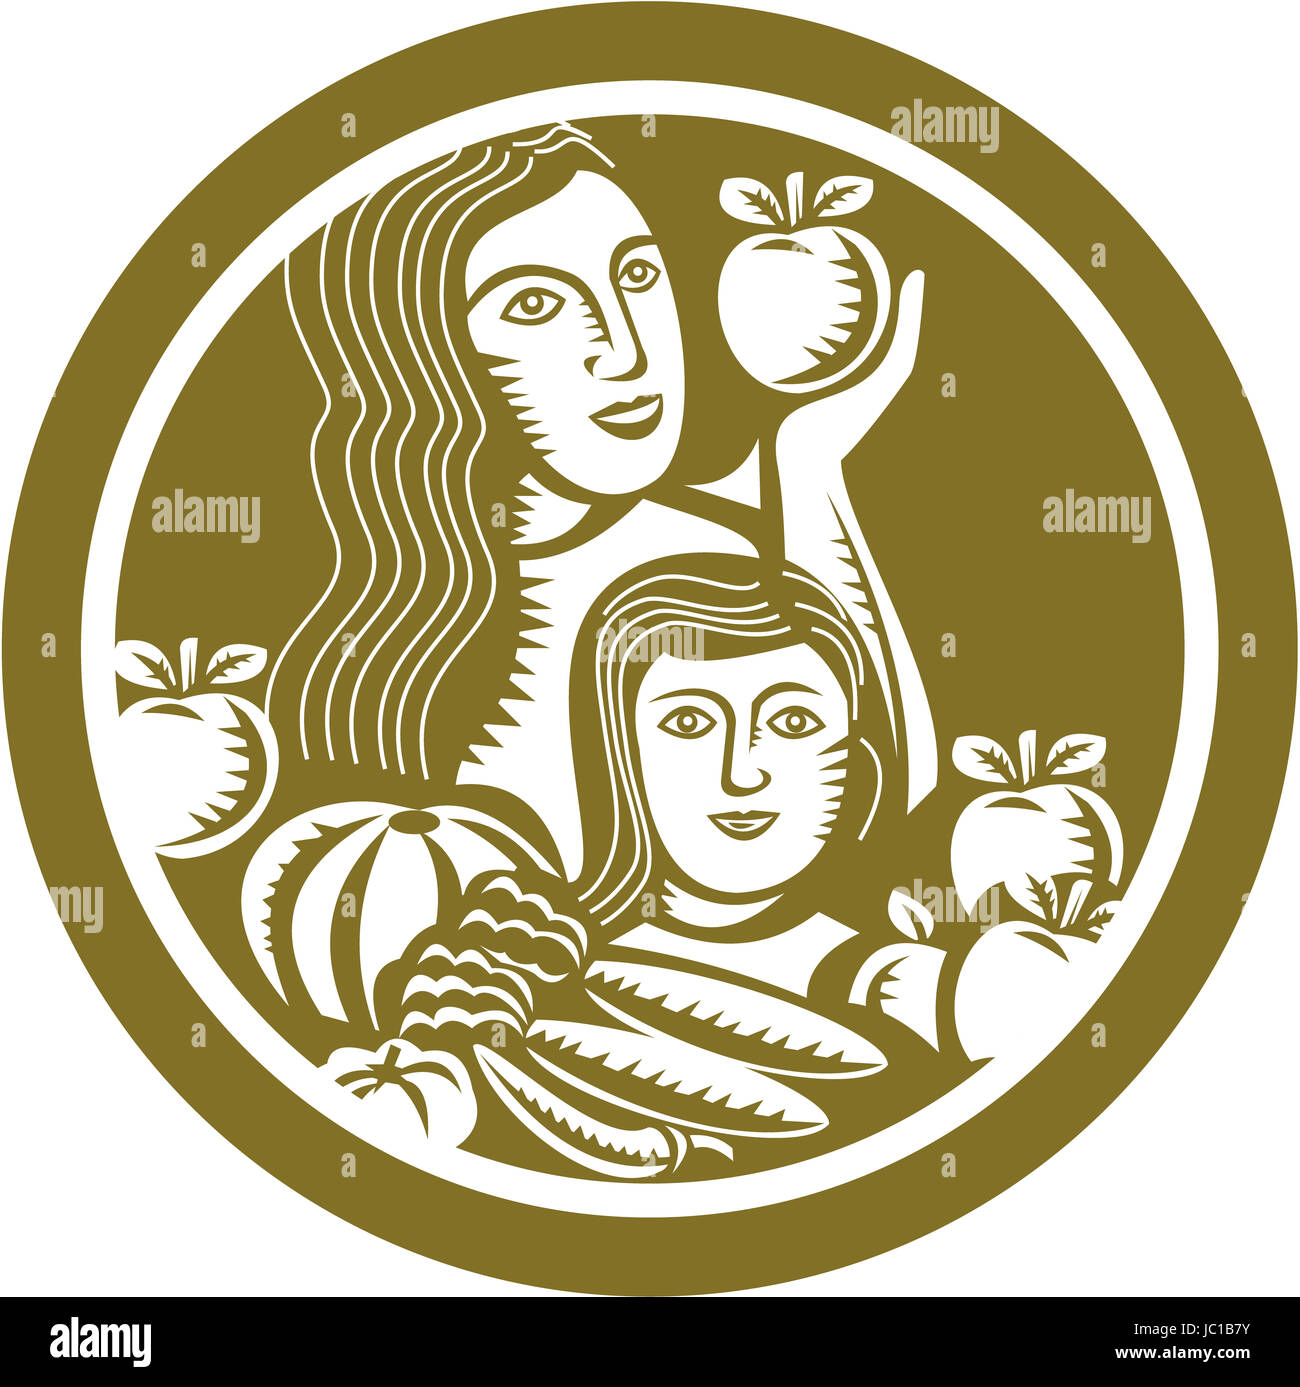 Illustration of a woman and child holding apples with fruits and vegetables set inside a circle done in retro style. Stock Photo